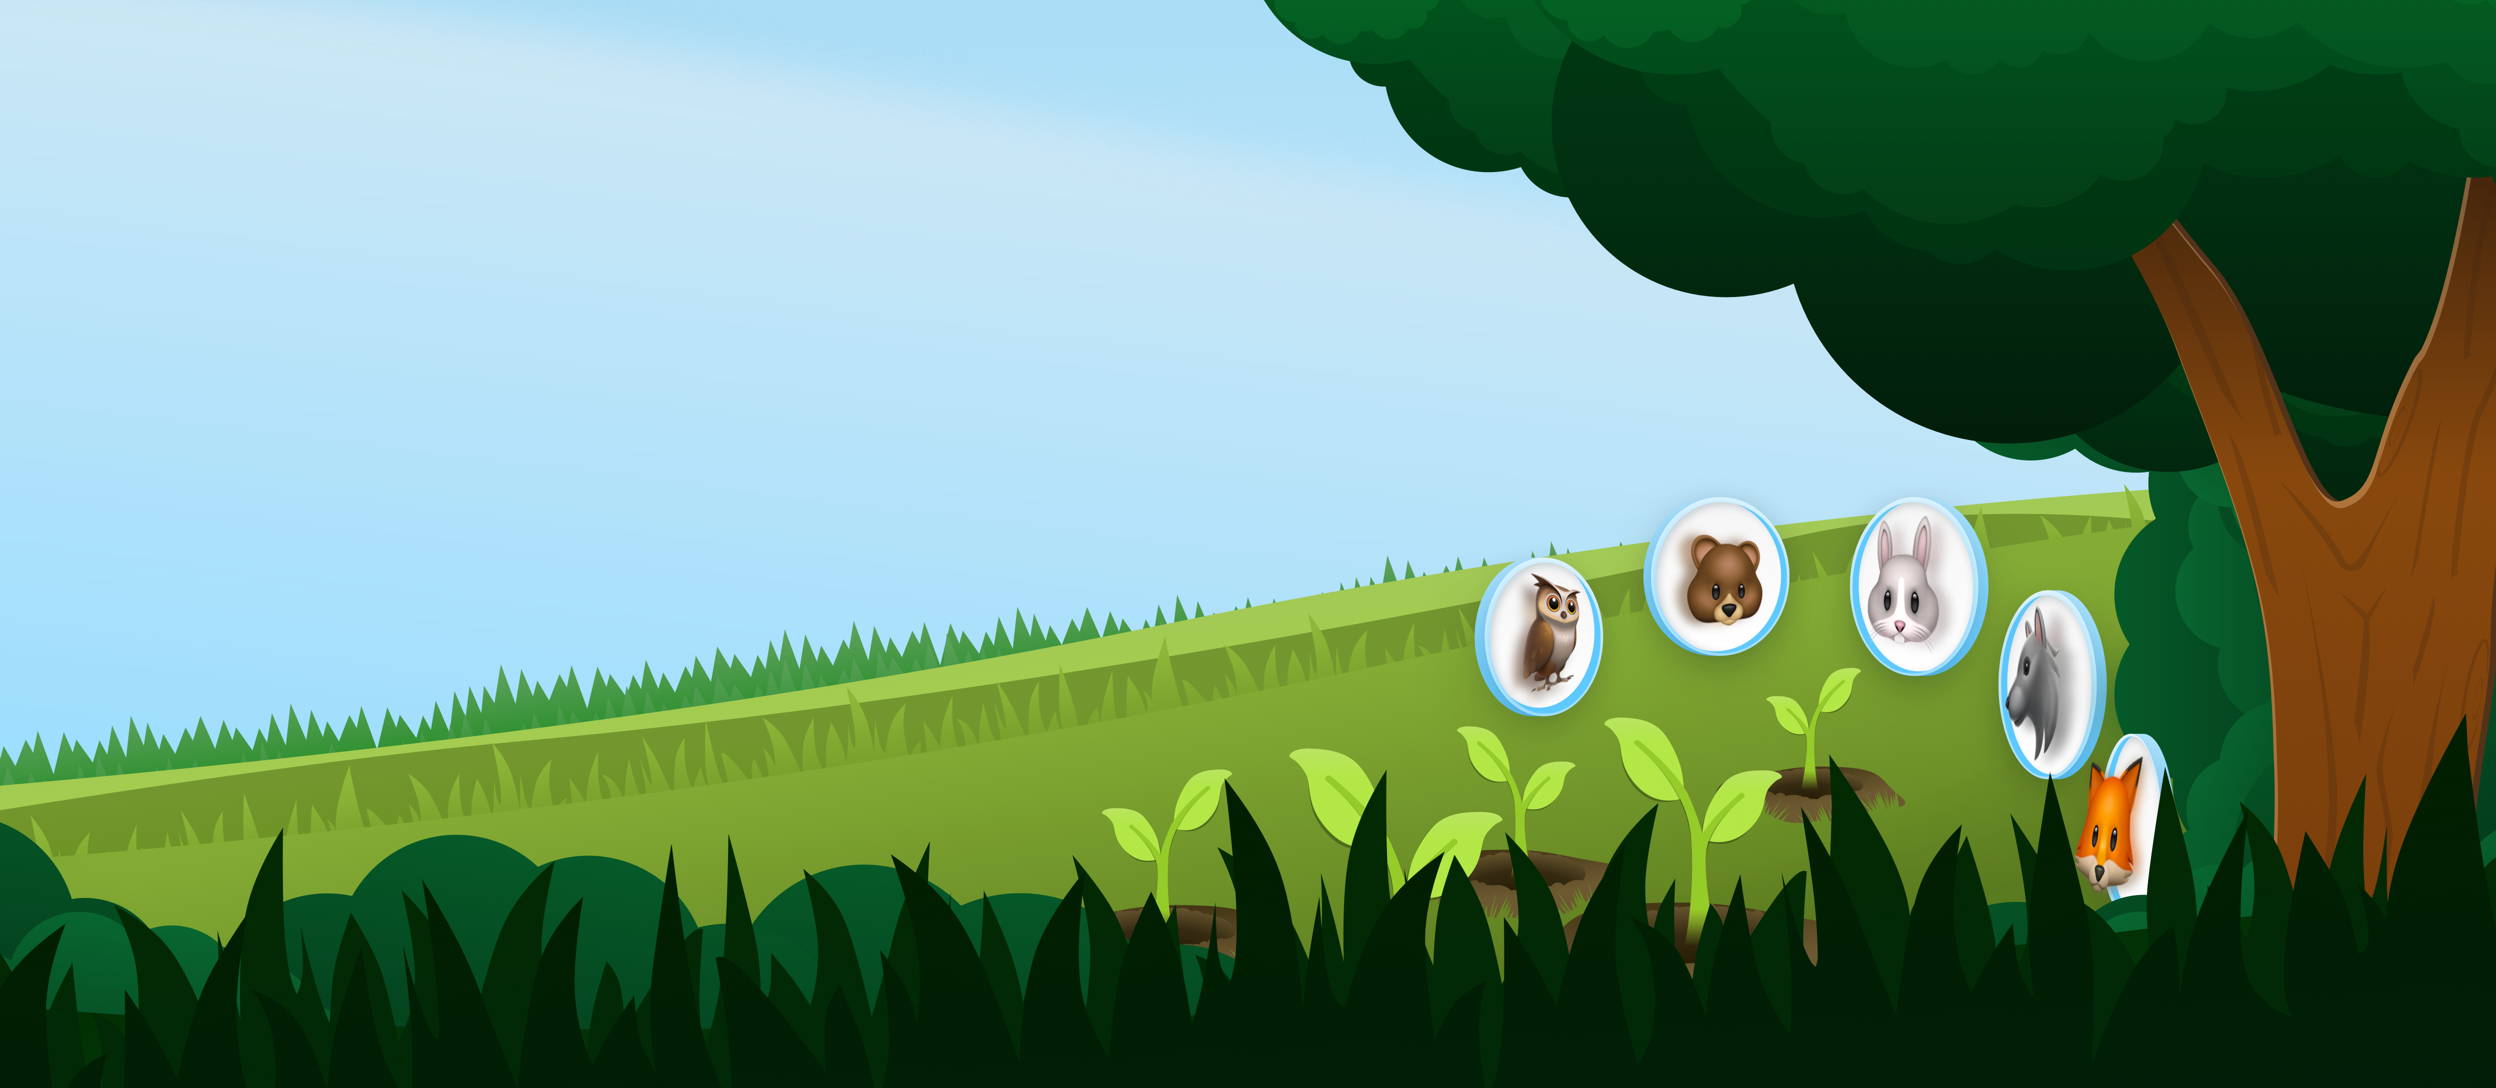 A grassy field with new plants sprouting and 5 hovering circles with various animal faces inside for Confetti's Virtual Mini Team Building Puzzles